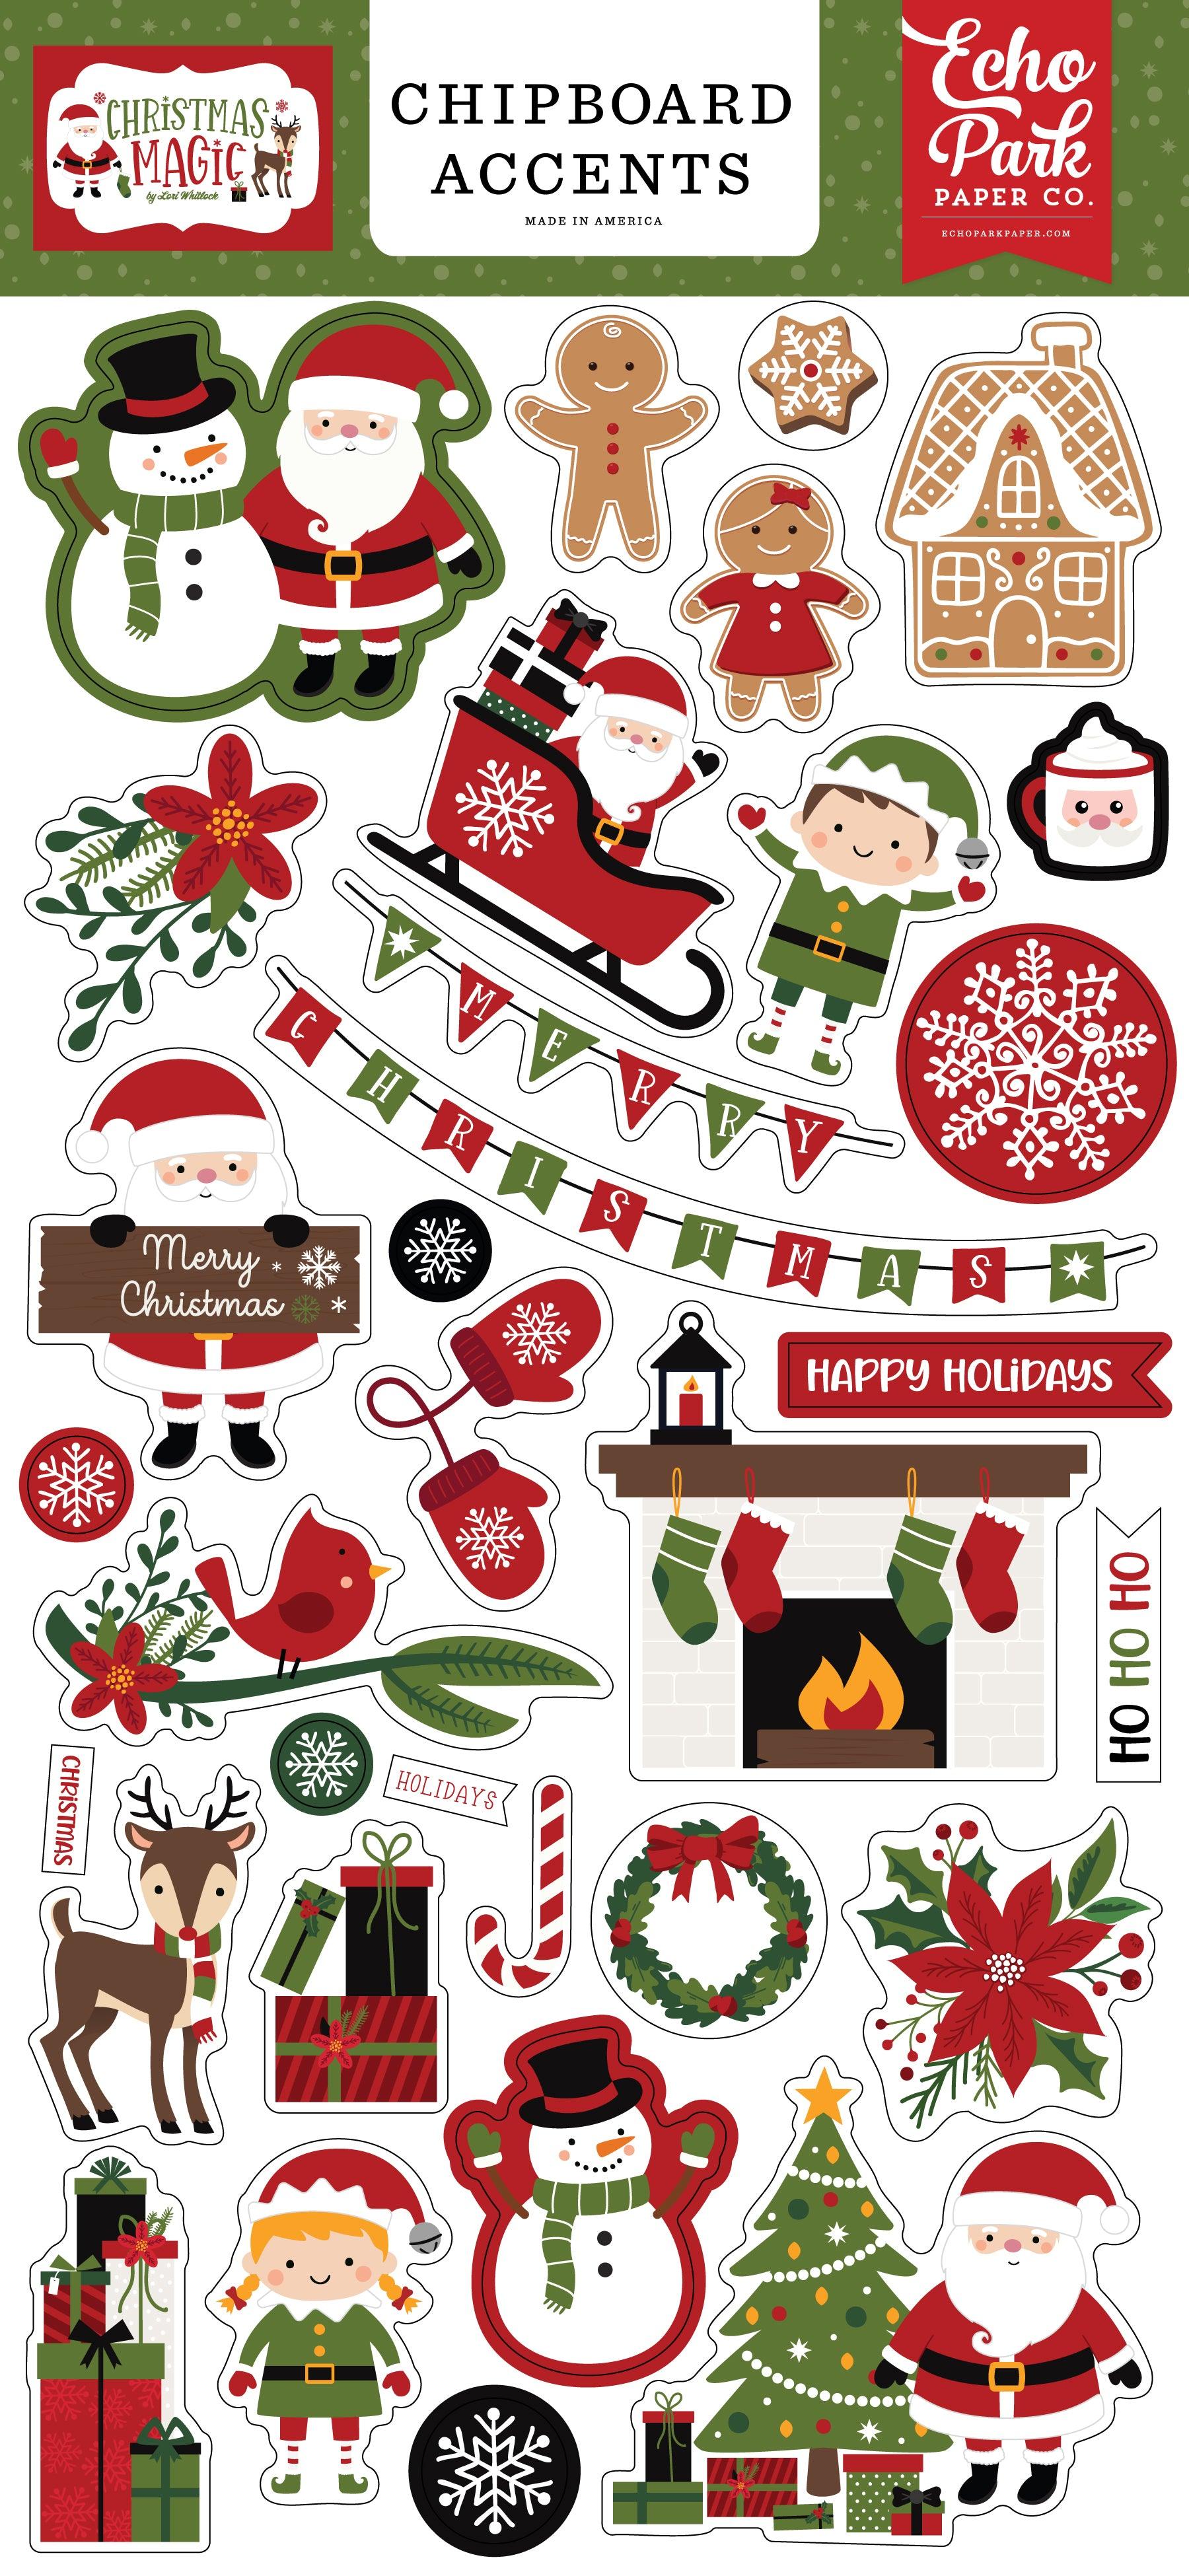 Christmas Magic Collection 6 x 12 Scrapbook Chipboard Accents by Echo Park Paper - Scrapbook Supply Companies